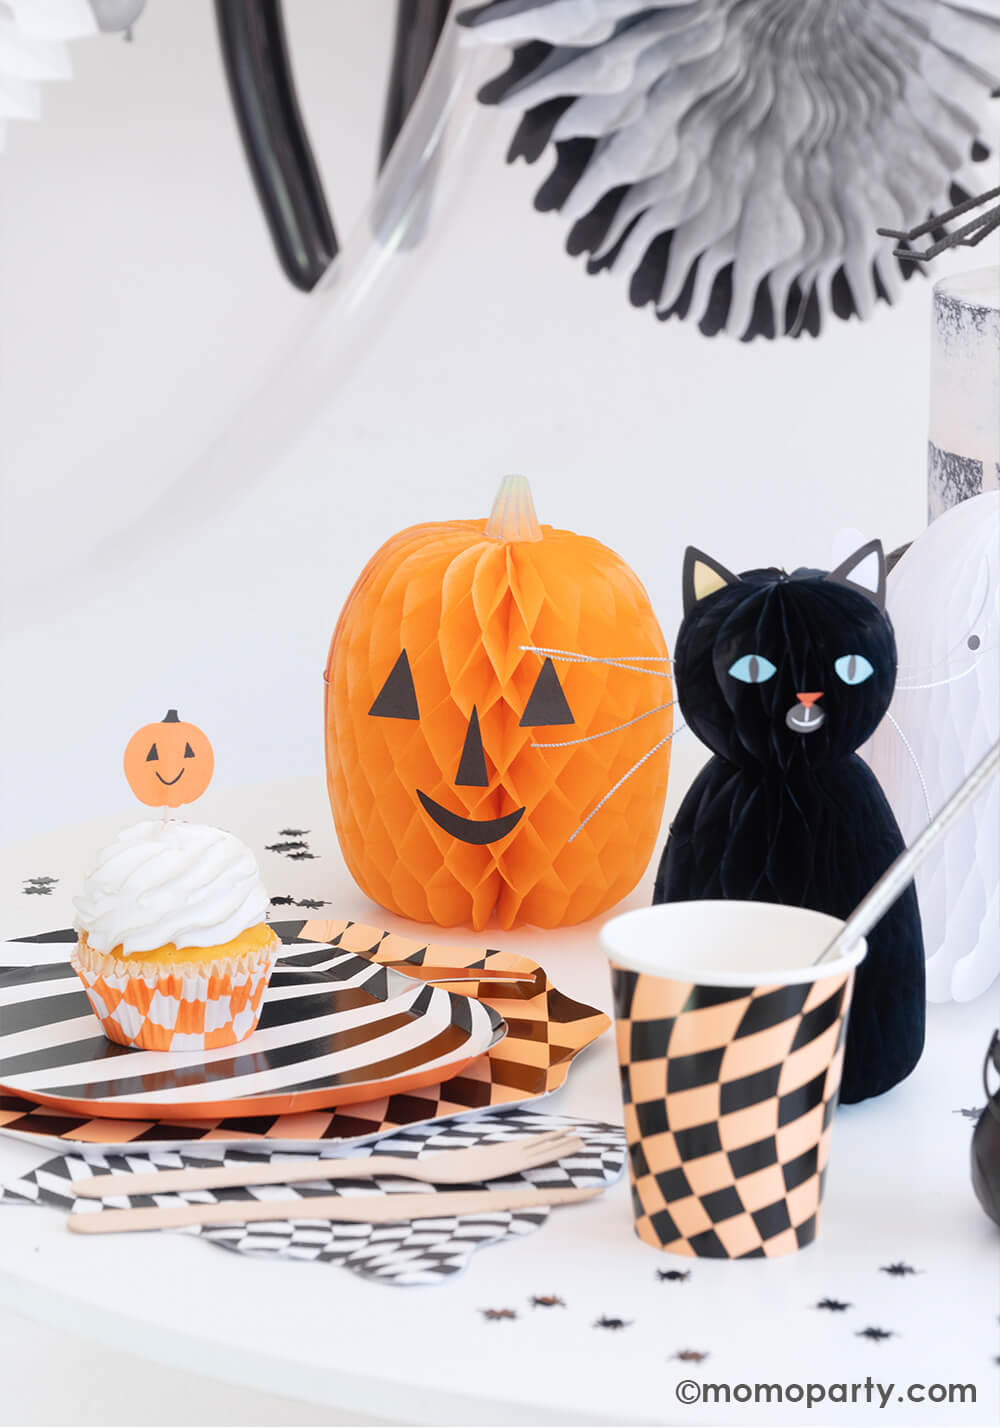 A fun Halloween party table in the classic black and orange colors featuring Momo Party's Halloween Checker Plates, napkins and party Cups by Meri Meri. On the table spider shaped confetti is scattered with honeycomb cat and pumpkin paper decorations as the centerpiece. On the plates there's a cupcake topped with a Halloween pumpkin topper. All makes a fun and whimsy inspiration for kid's friendly Halloween party ideas.